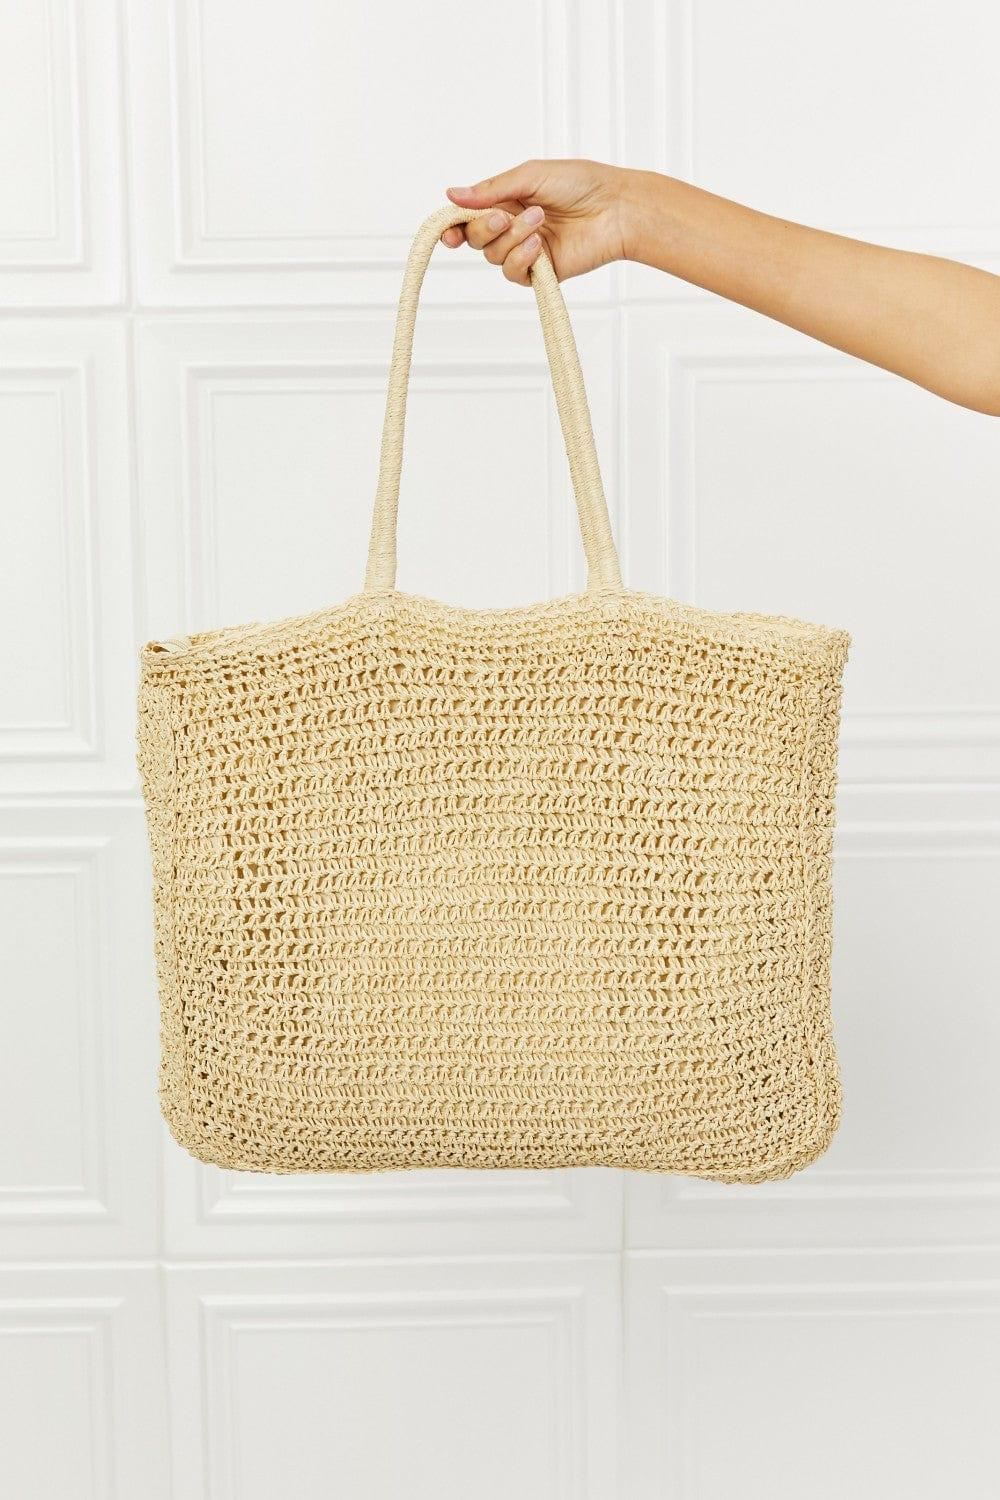 Off The Coast Straw Tote - Inspired Eye Boutique